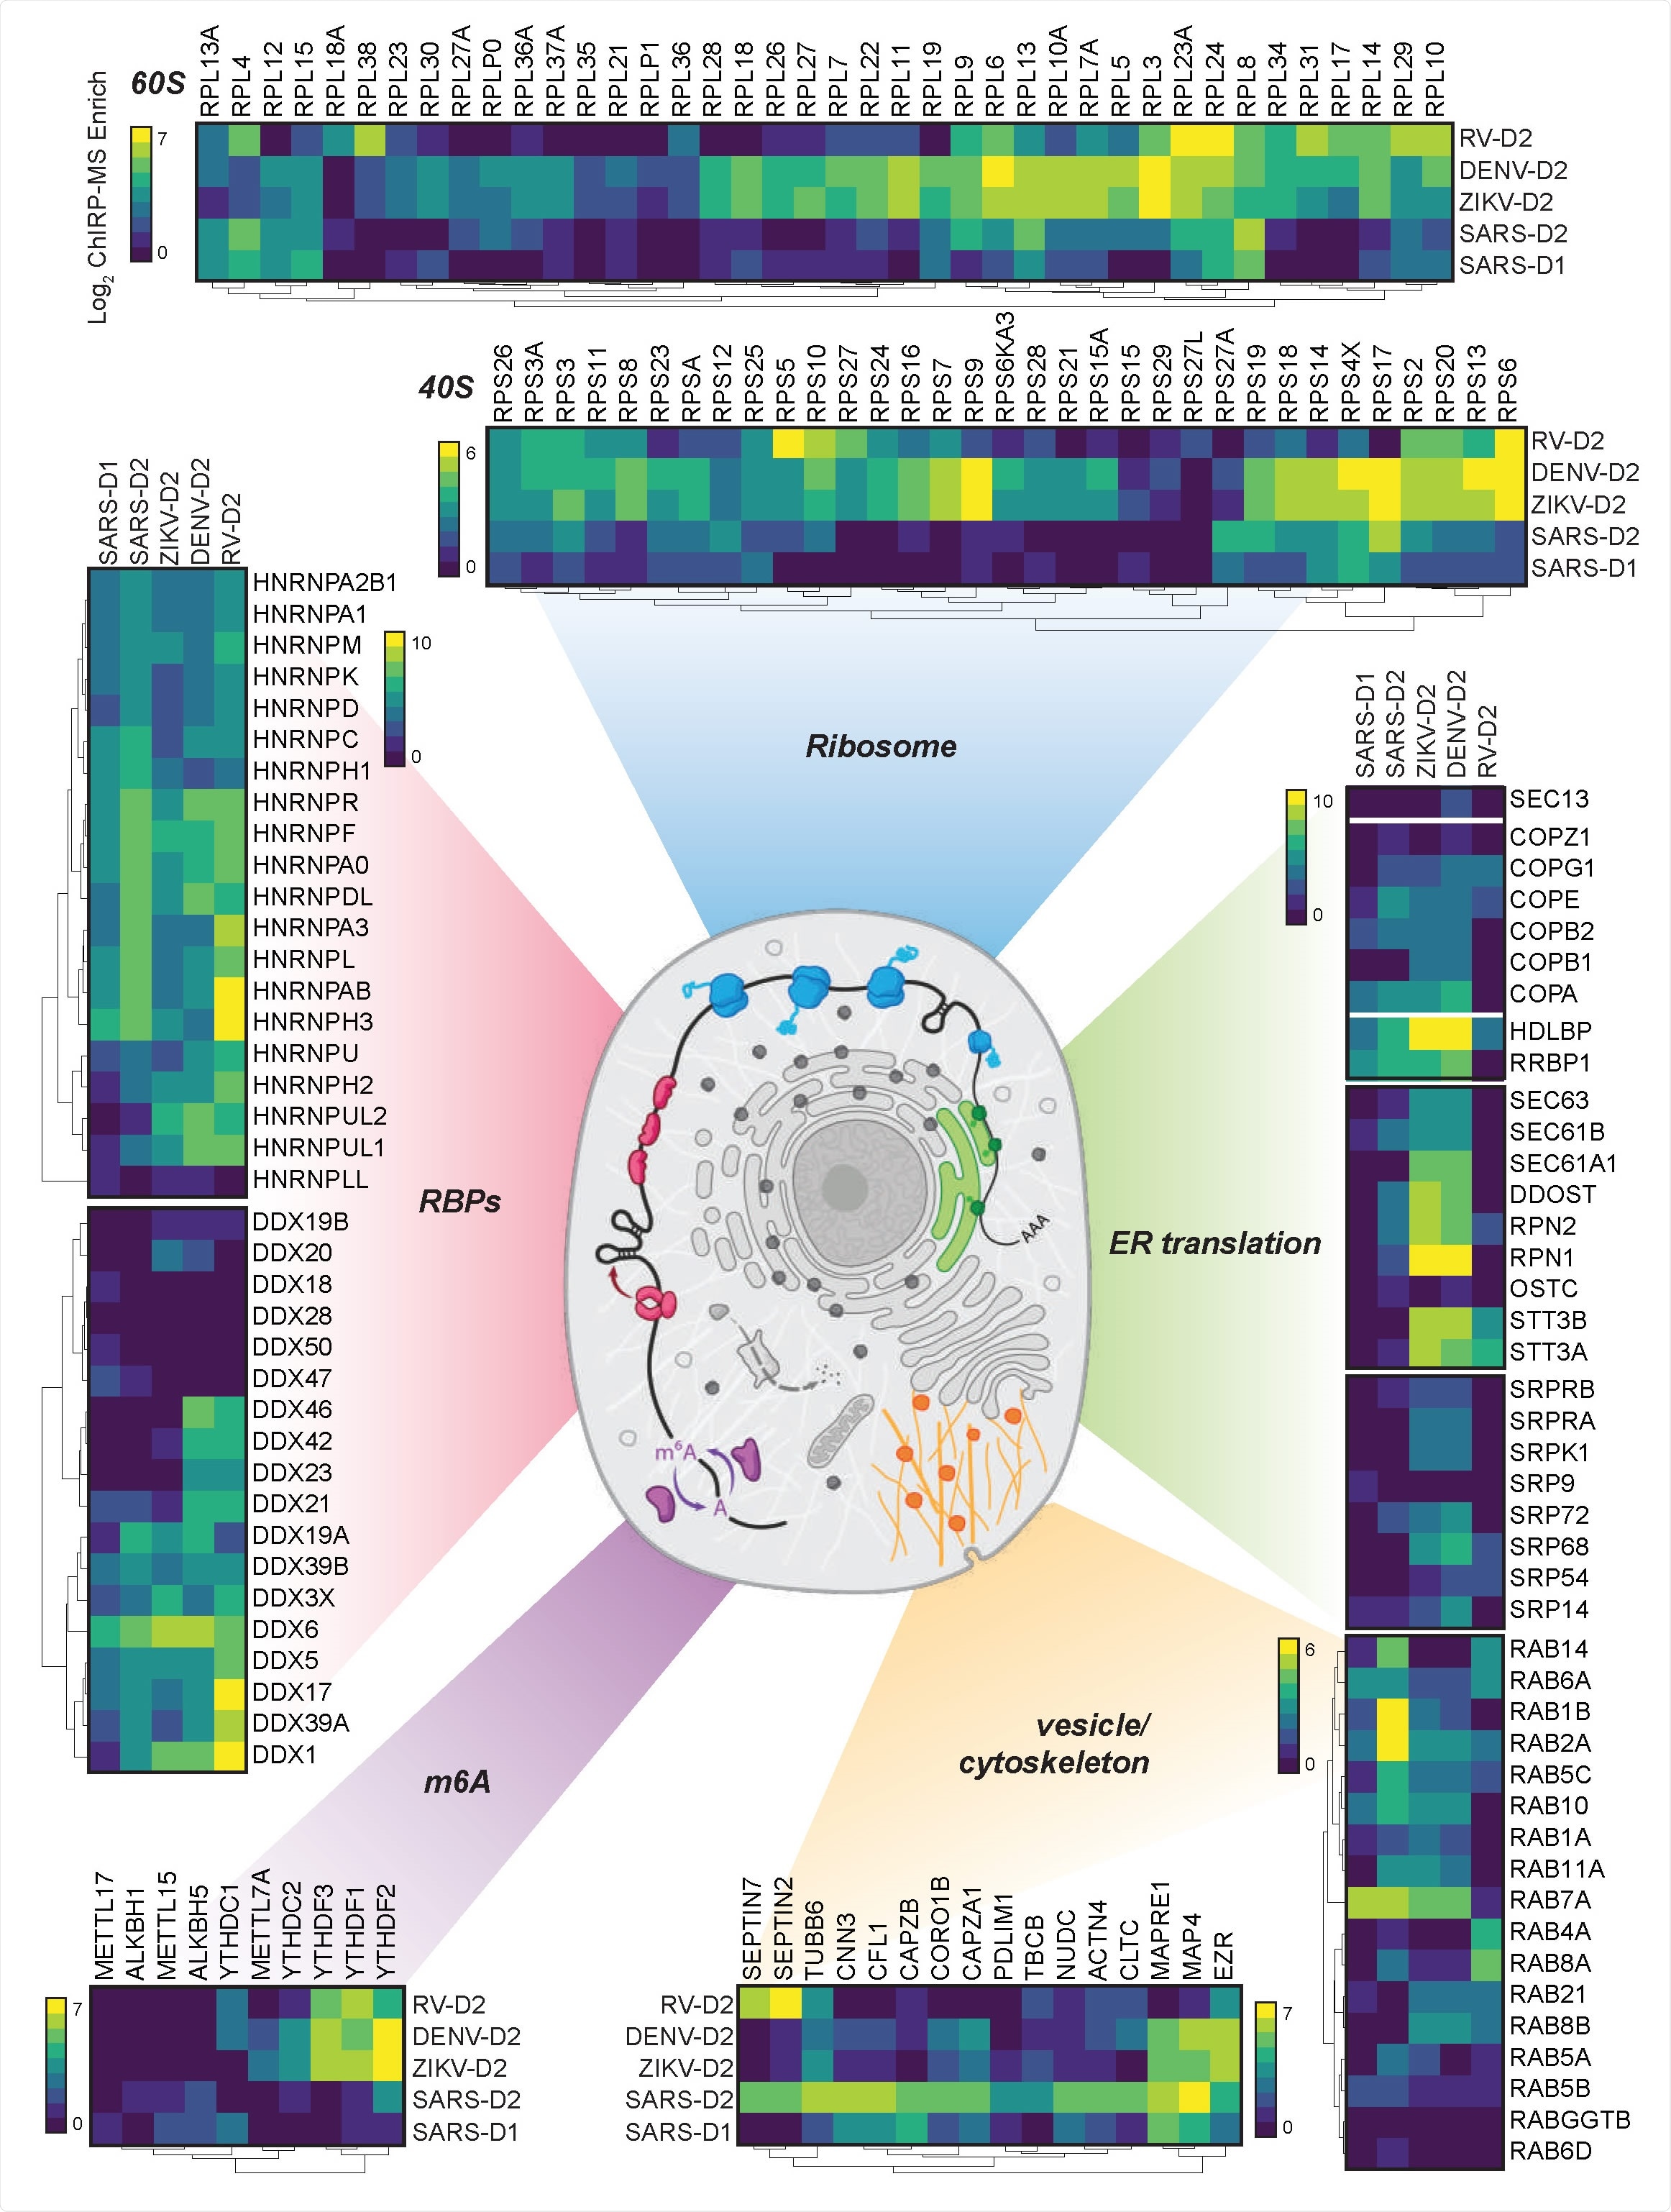 Cellular context of expanded interactomes across viruses. Selected groups of proteins, their enrichment in SARS-CoV-2, Zika, Dengue, and Rhinovirus ChIRP, and their approximate subcellular localization. Heat map colors indicate the log 2 ChIRP-MS enrichment values. Each heatmap has a separate scale bar.